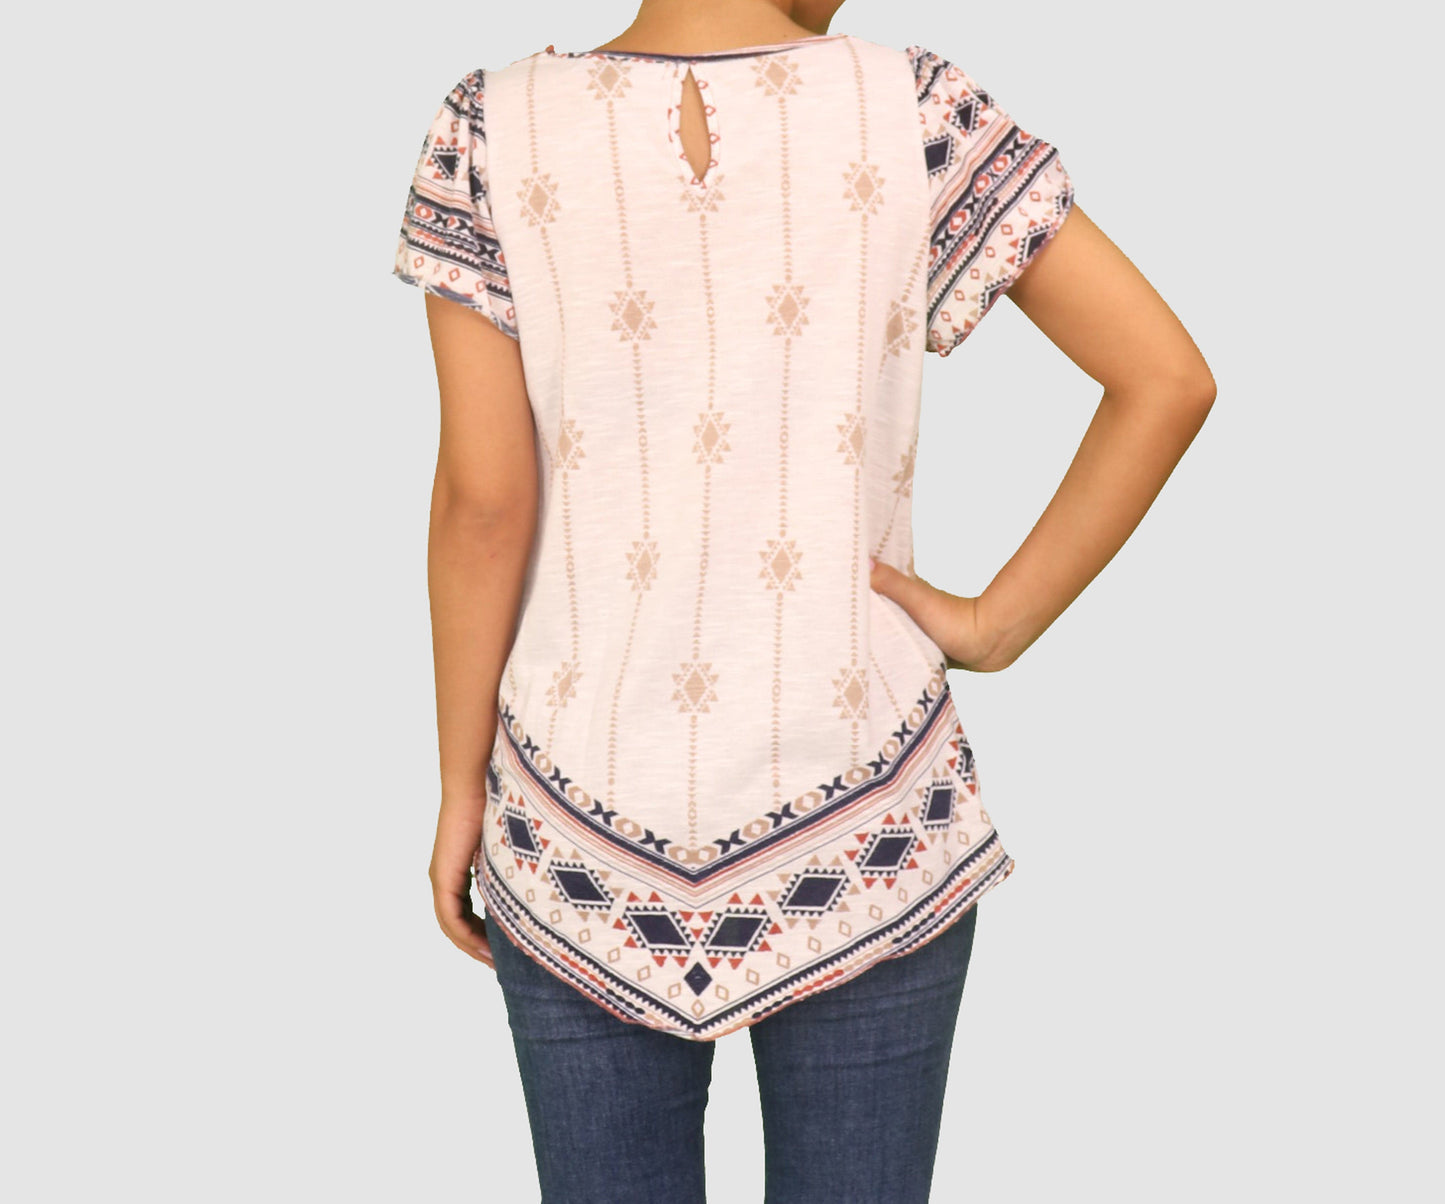 ABSOLUTELY FAMOUS Womens Tops Small / White/ Multi Short Sleeve Top